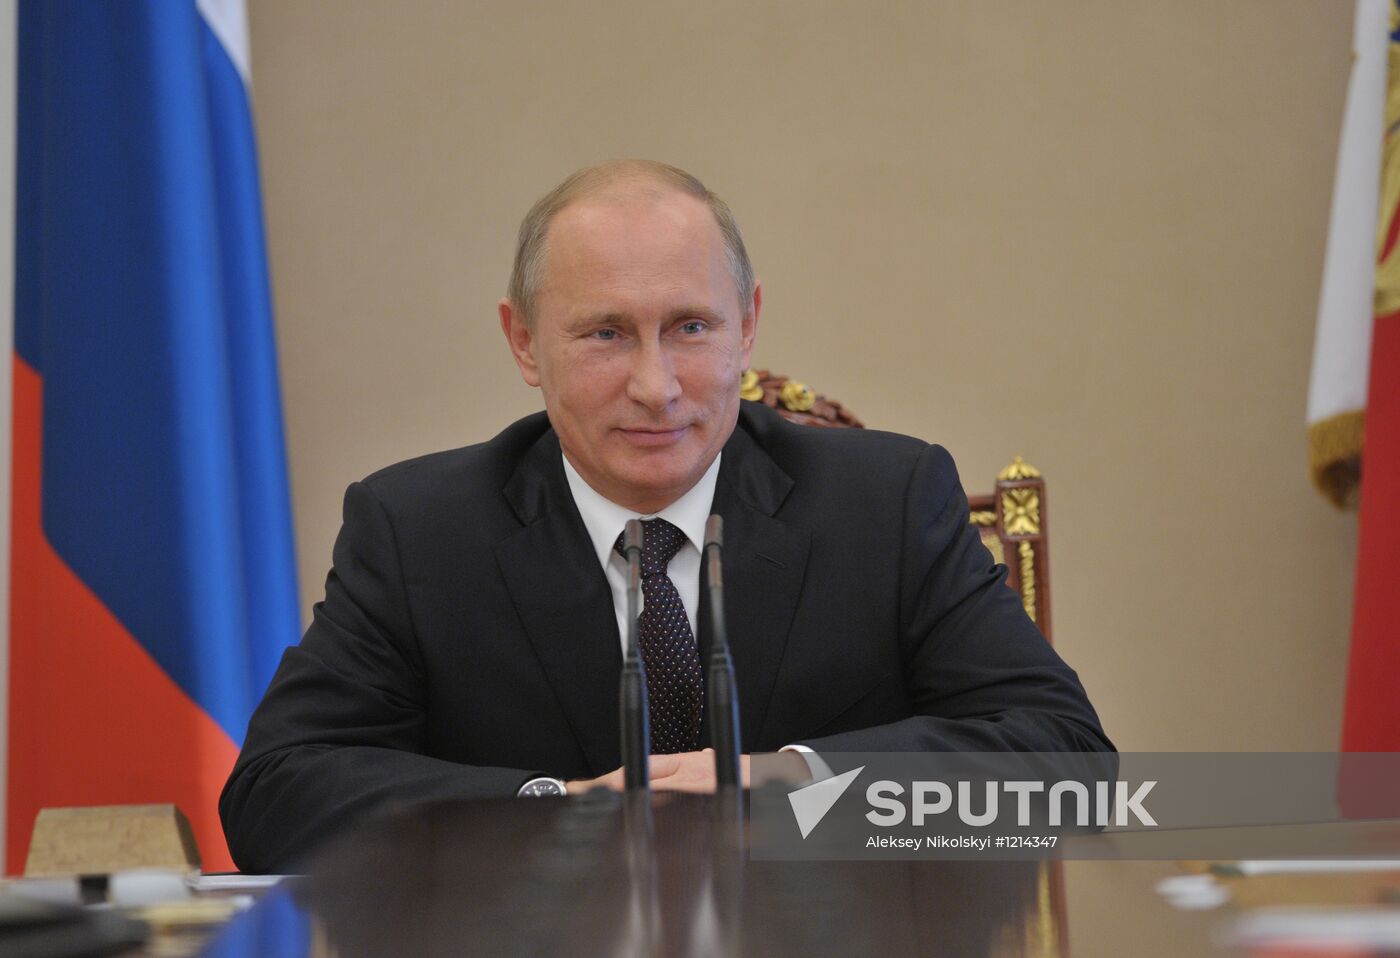 V.Putin holds meeting of Security Council of Russian Federation